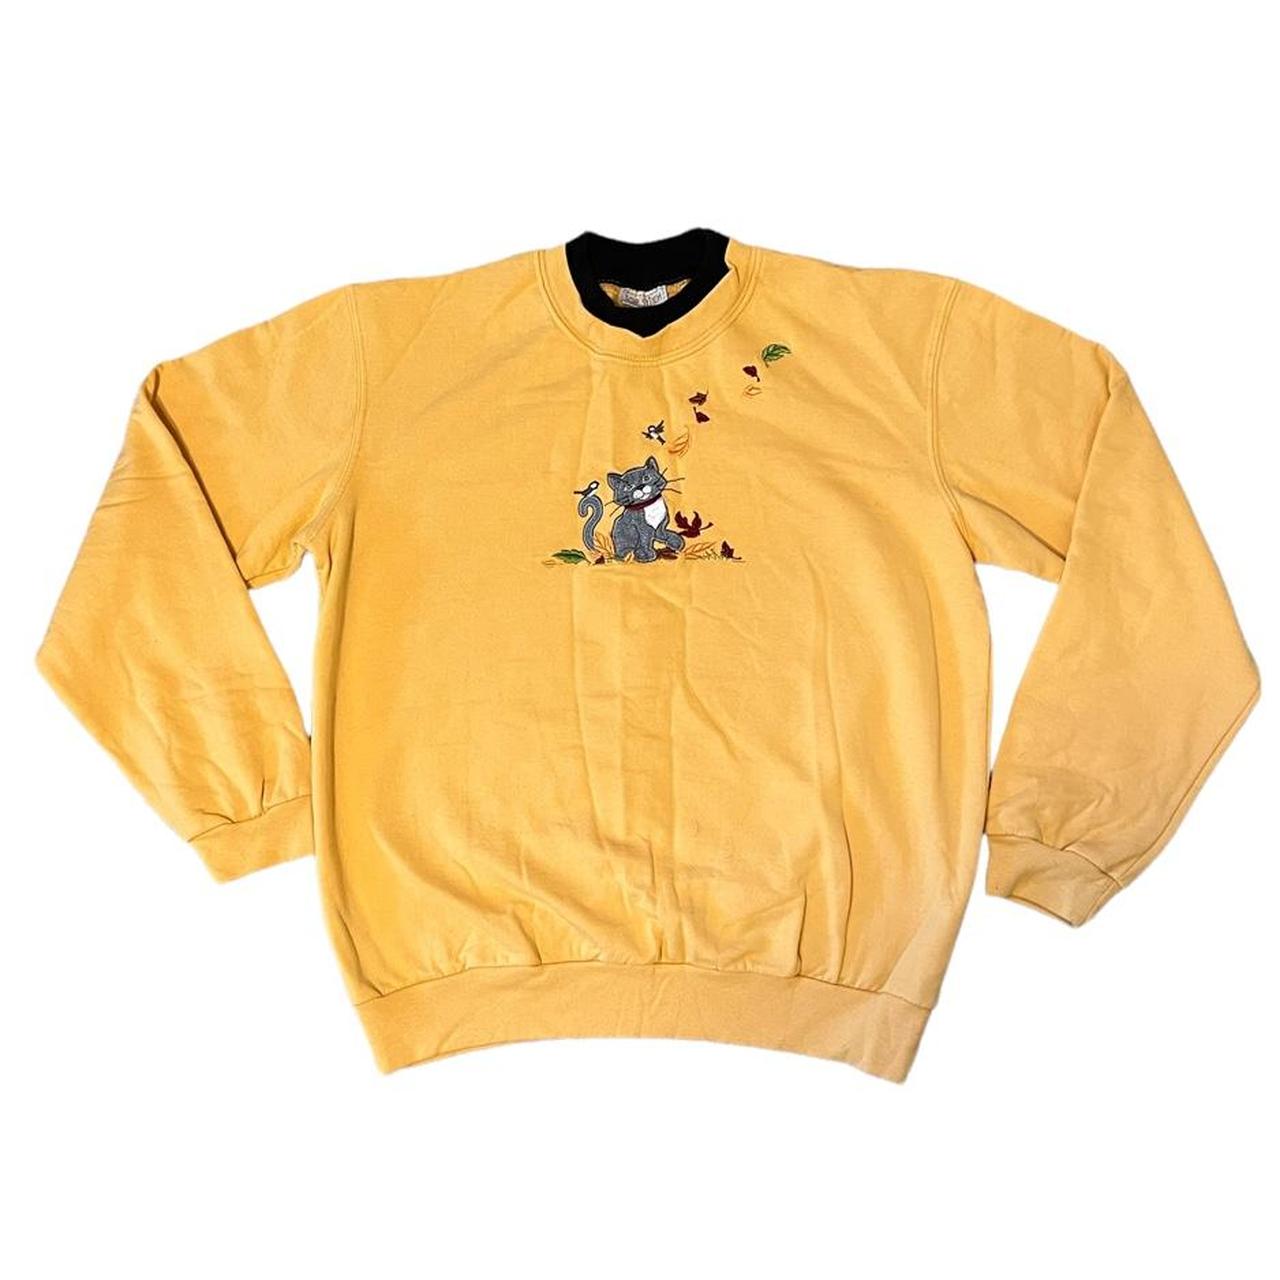 Product Image 1 - Vintage Embroidered Crewneck

Embroidered Cat during